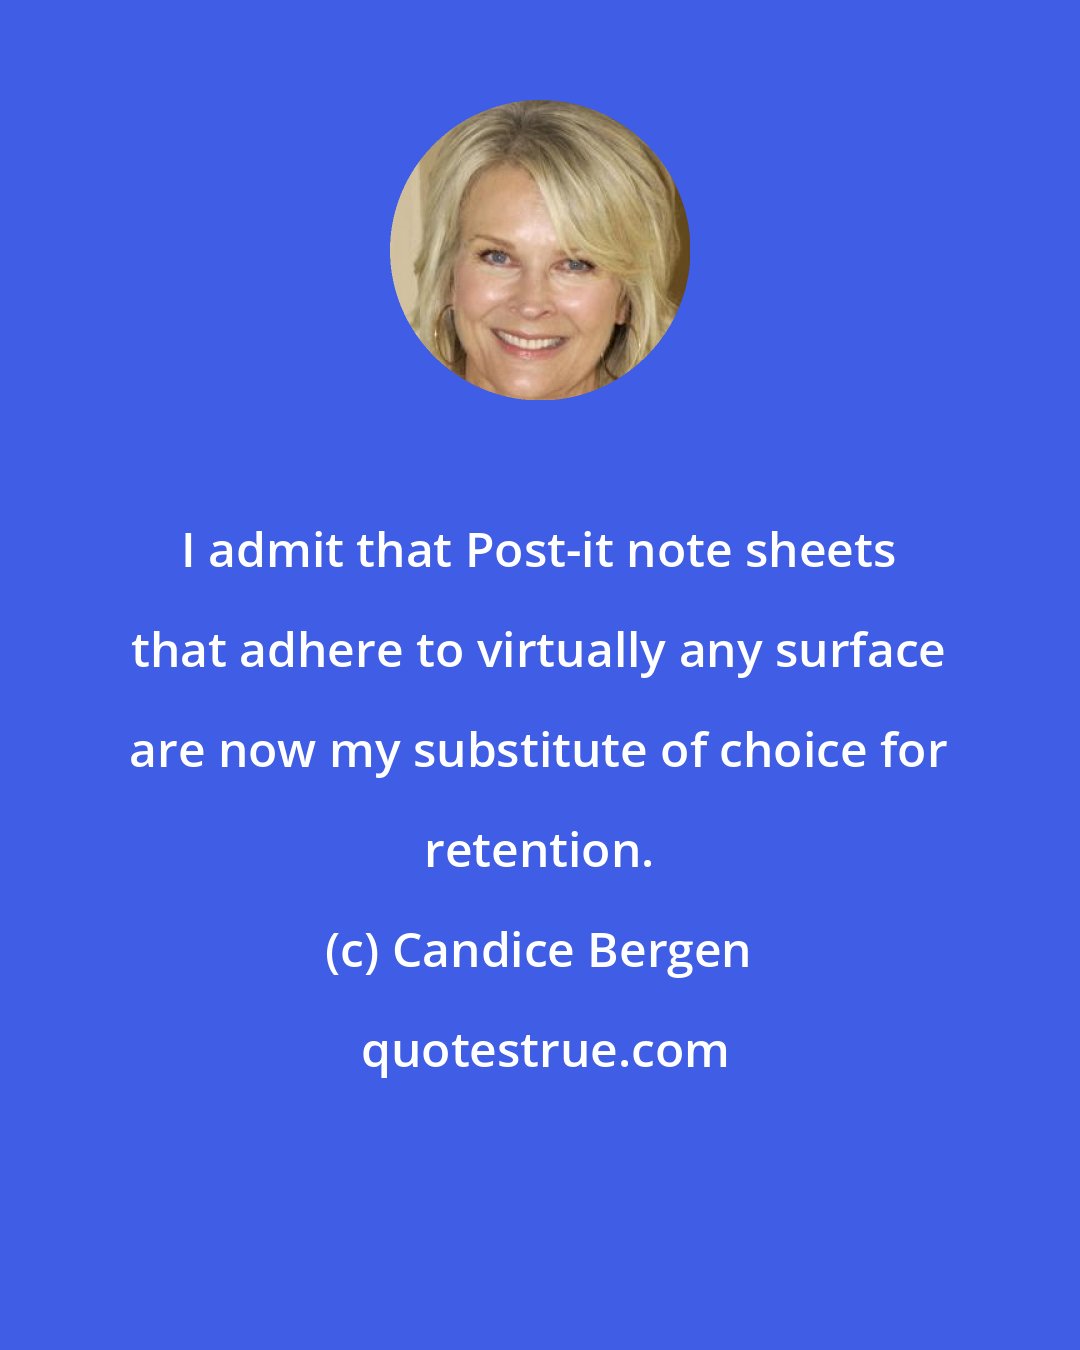 Candice Bergen: I admit that Post-it note sheets that adhere to virtually any surface are now my substitute of choice for retention.